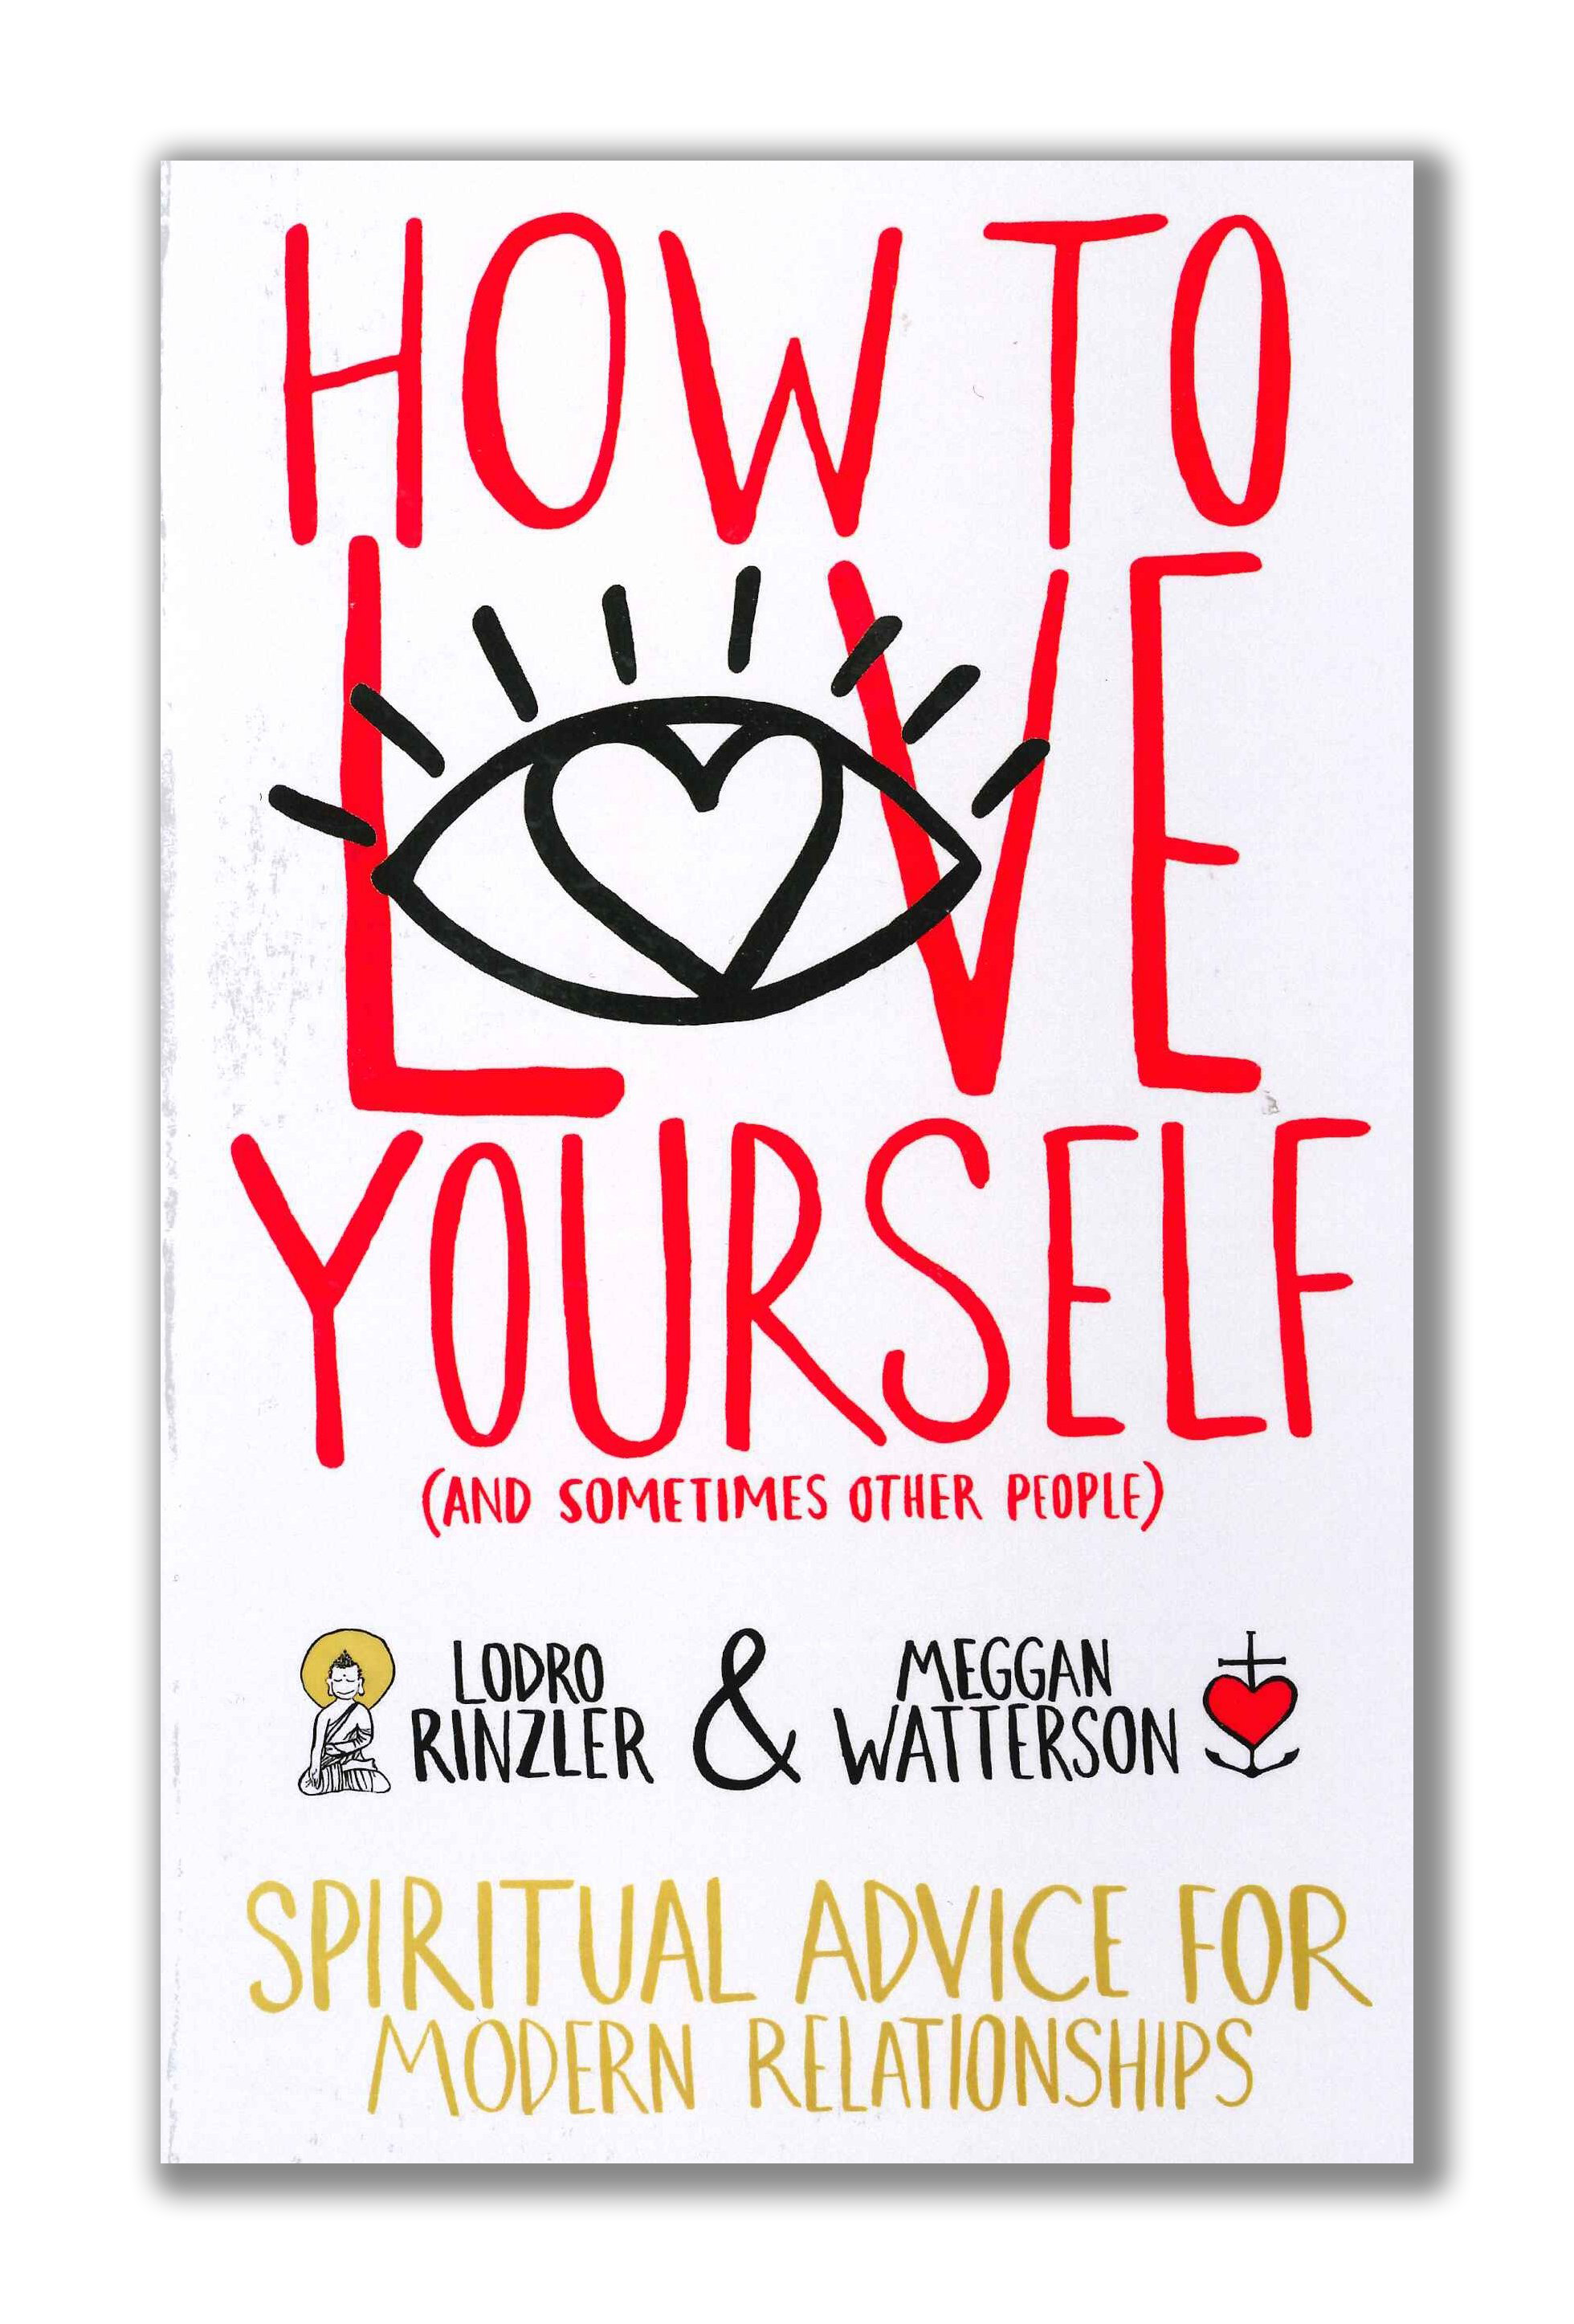 How To Love Yourself Meggan Watterson